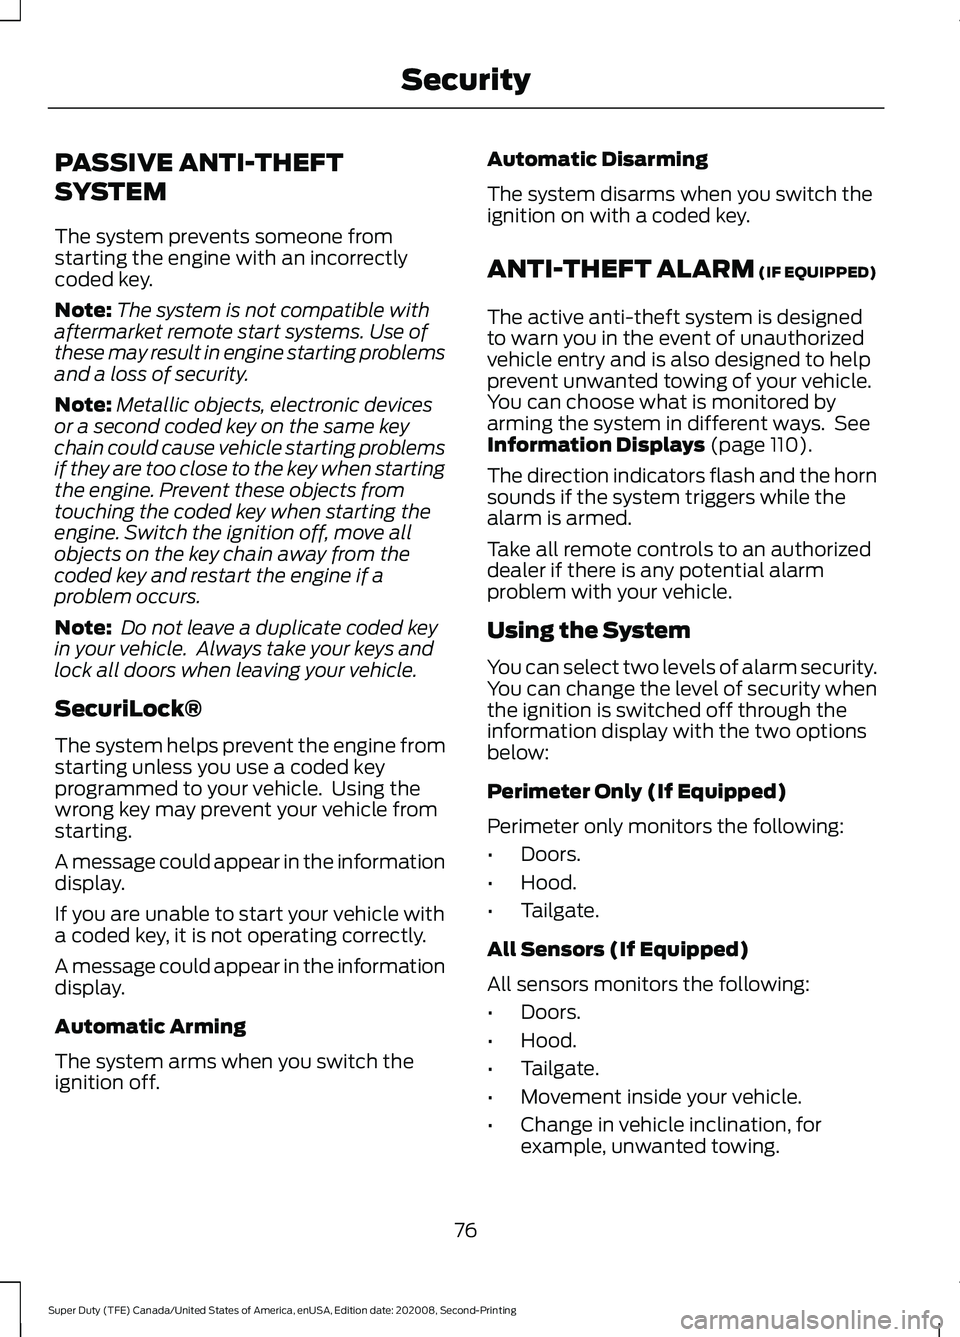 FORD SUPER DUTY 2021  Owners Manual PASSIVE ANTI-THEFT
SYSTEM
The system prevents someone from
starting the engine with an incorrectly
coded key.
Note:
The system is not compatible with
aftermarket remote start systems. Use of
these may